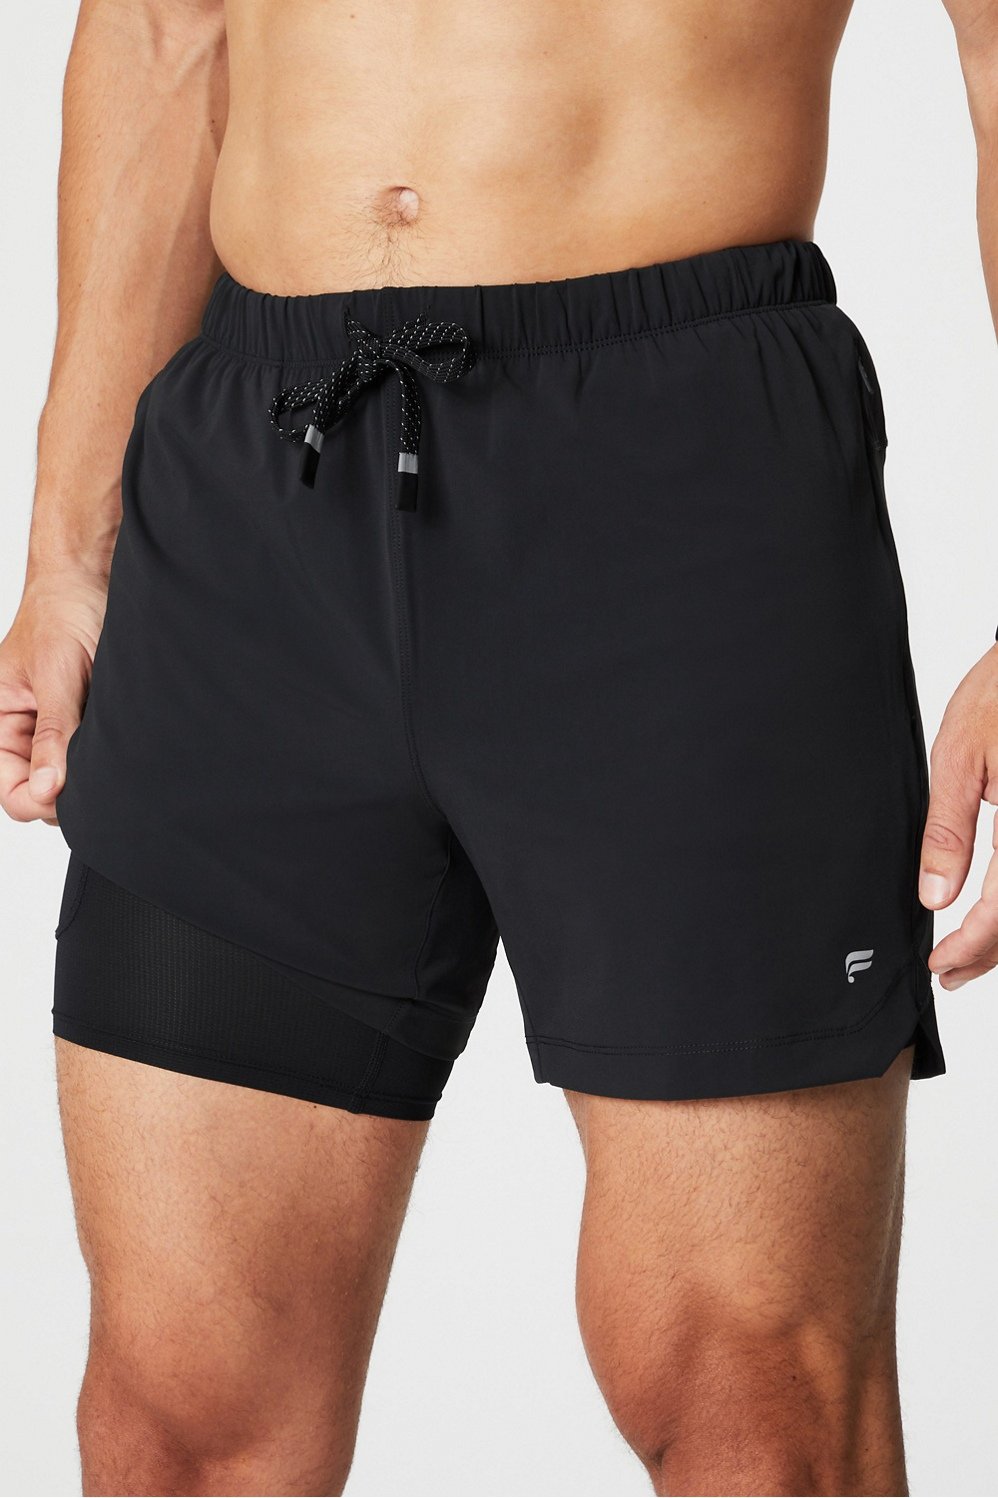 Pants & Shorts Guide From Fabletics Men - Popdust